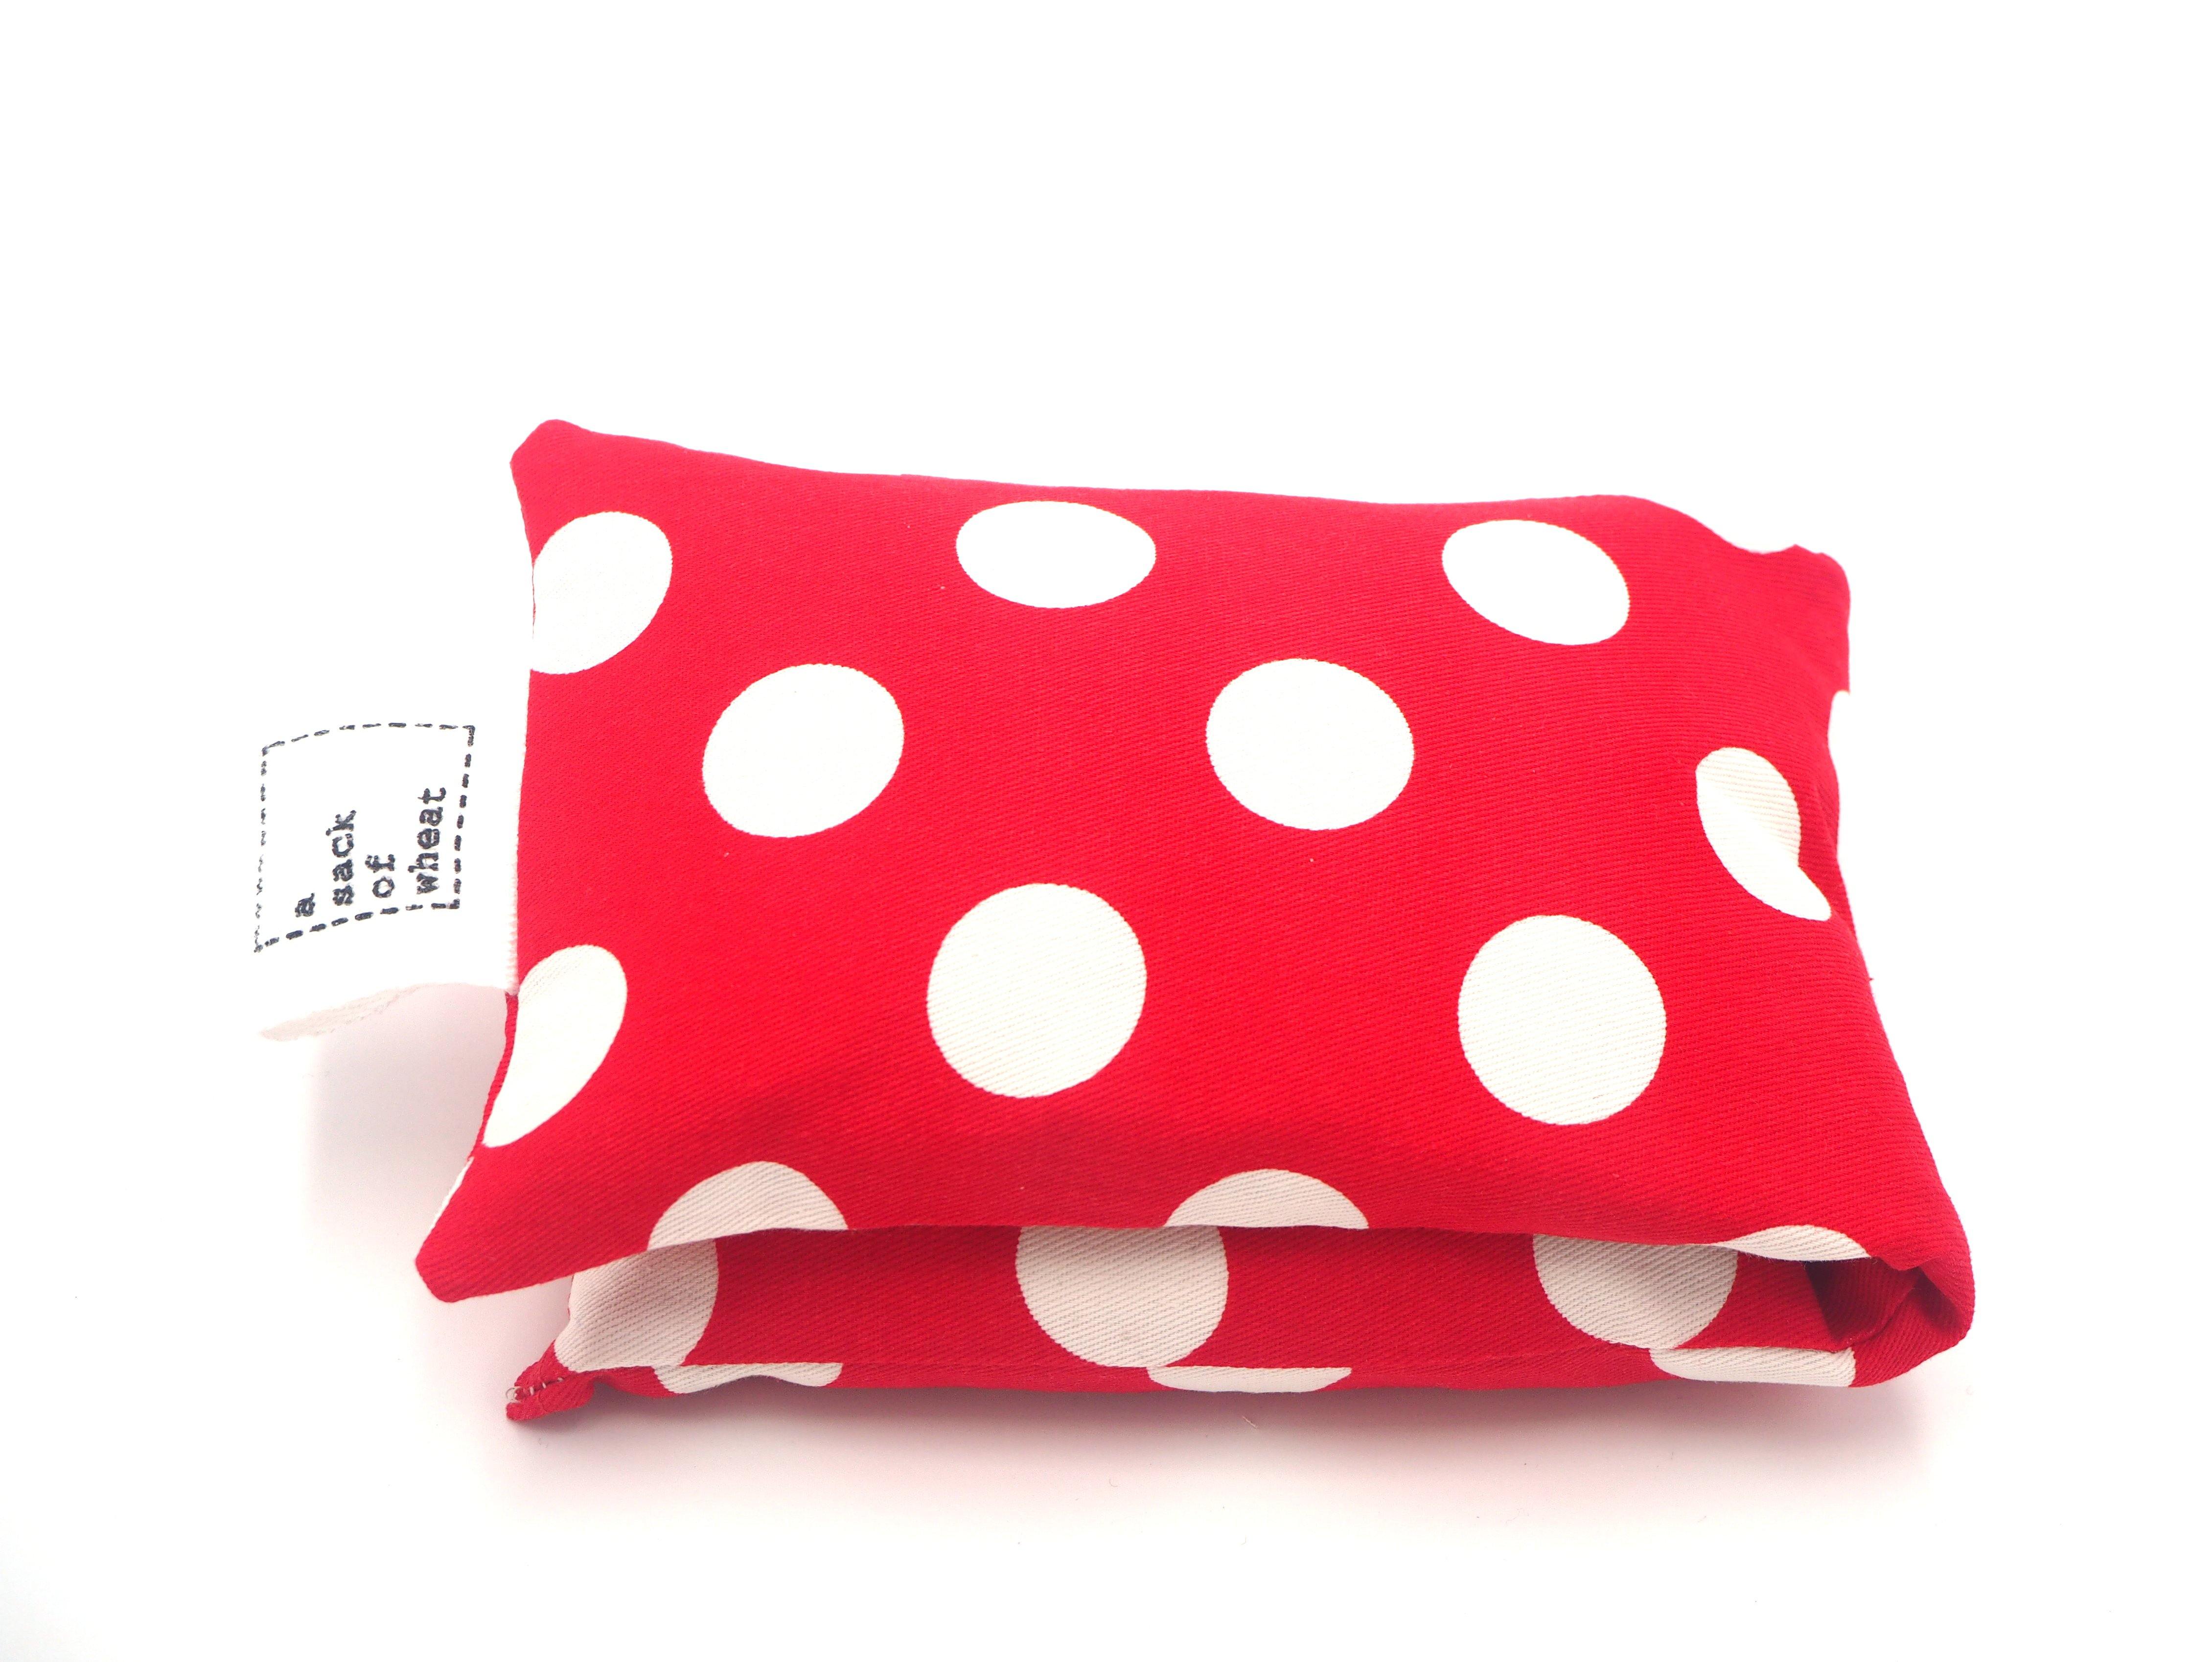 Folded view of A Sack Of Wheat, in a stunning Red & White Polka Dot print, 100% cotton fabric Image